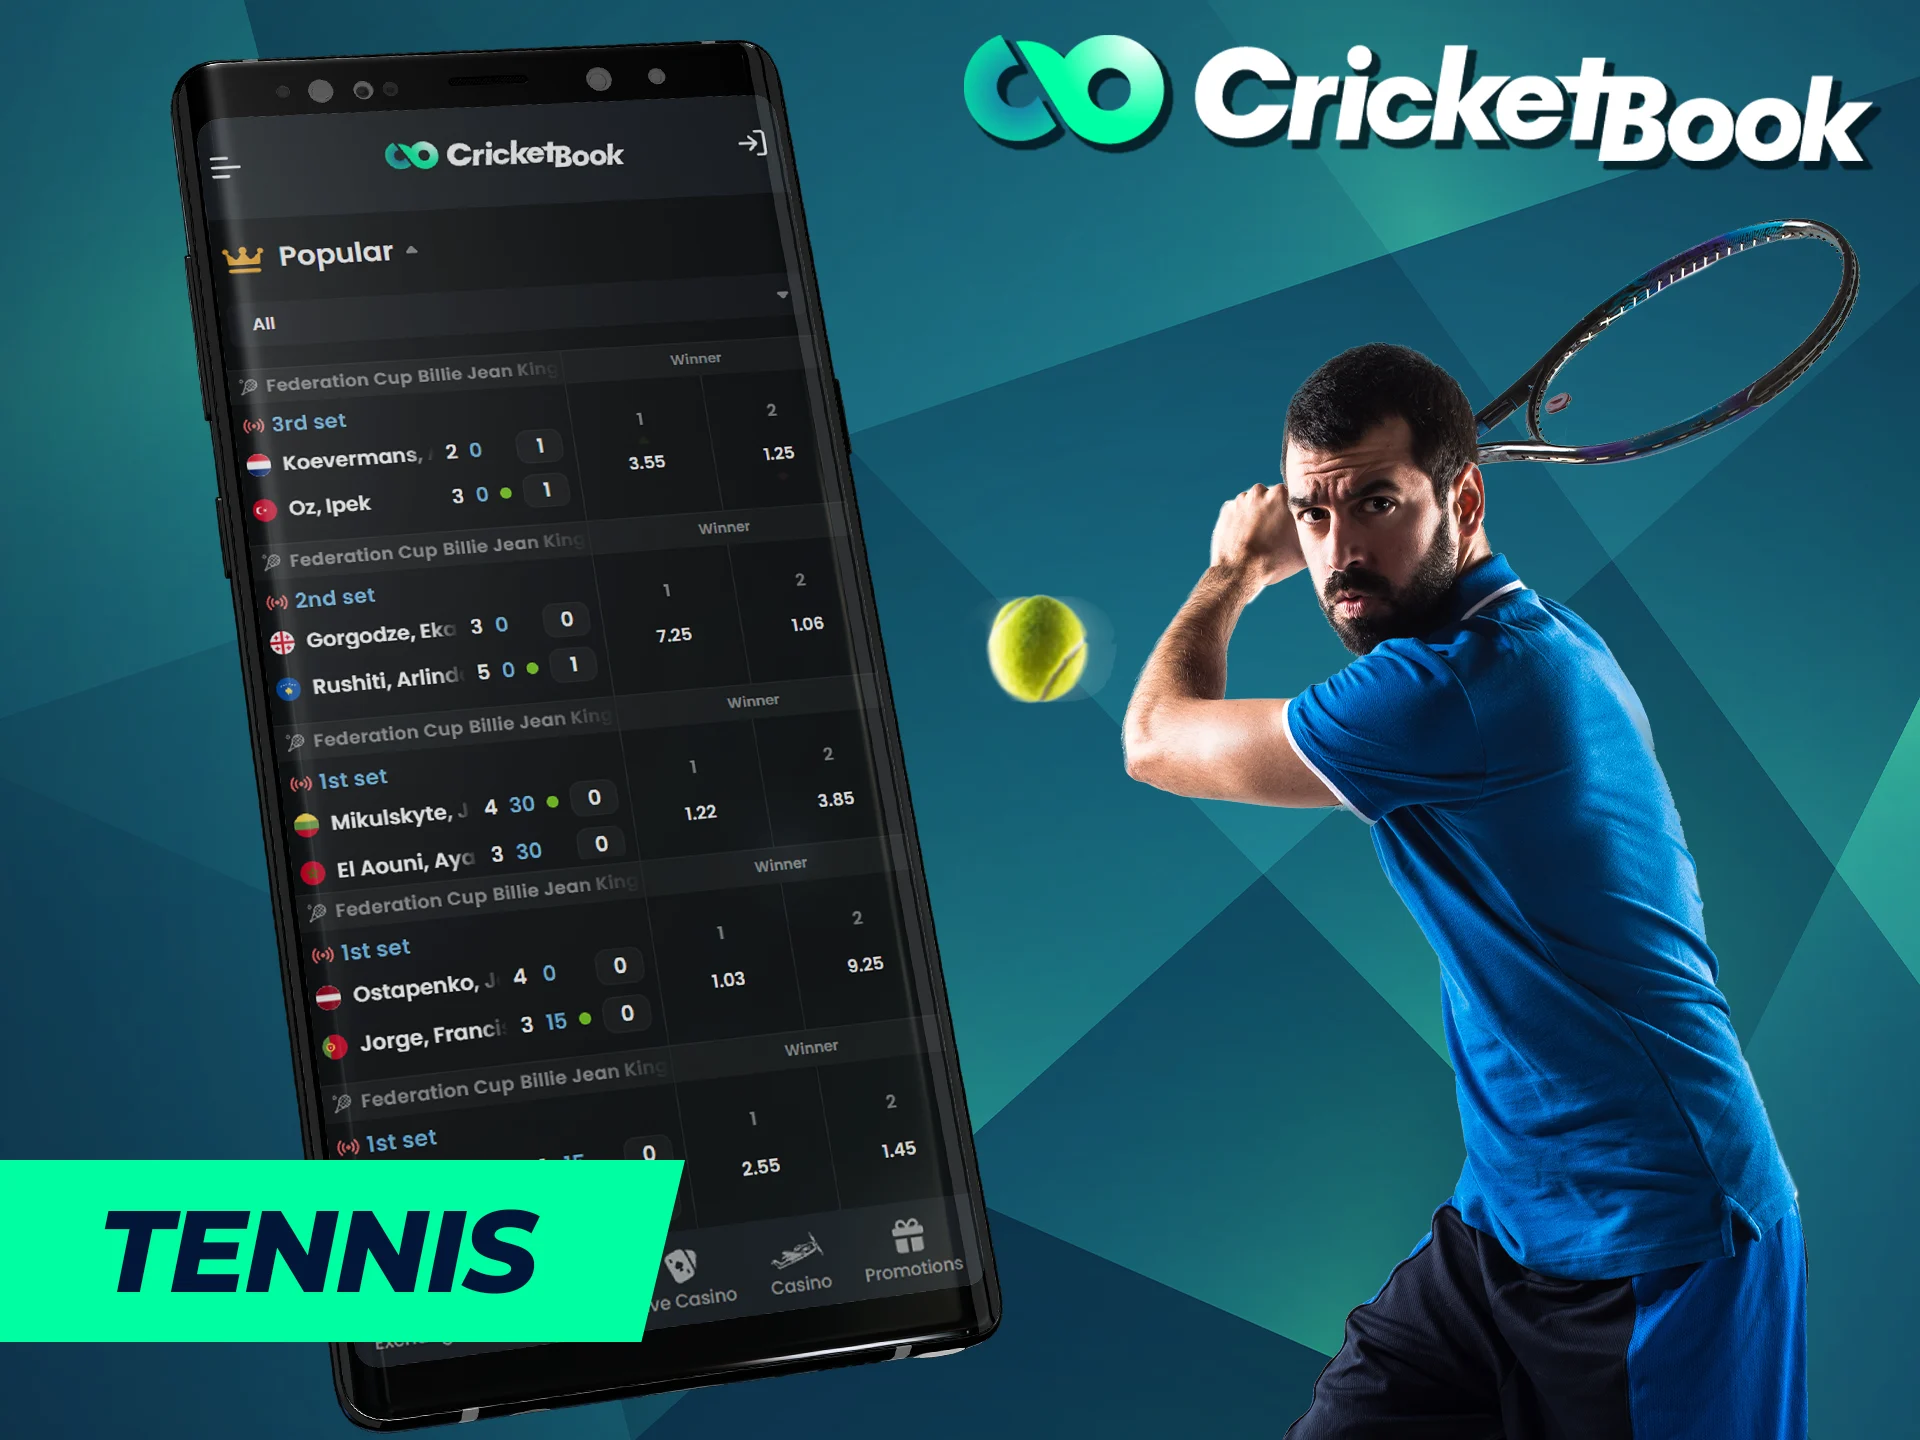 Try betting on tennis on the CricketBook app.